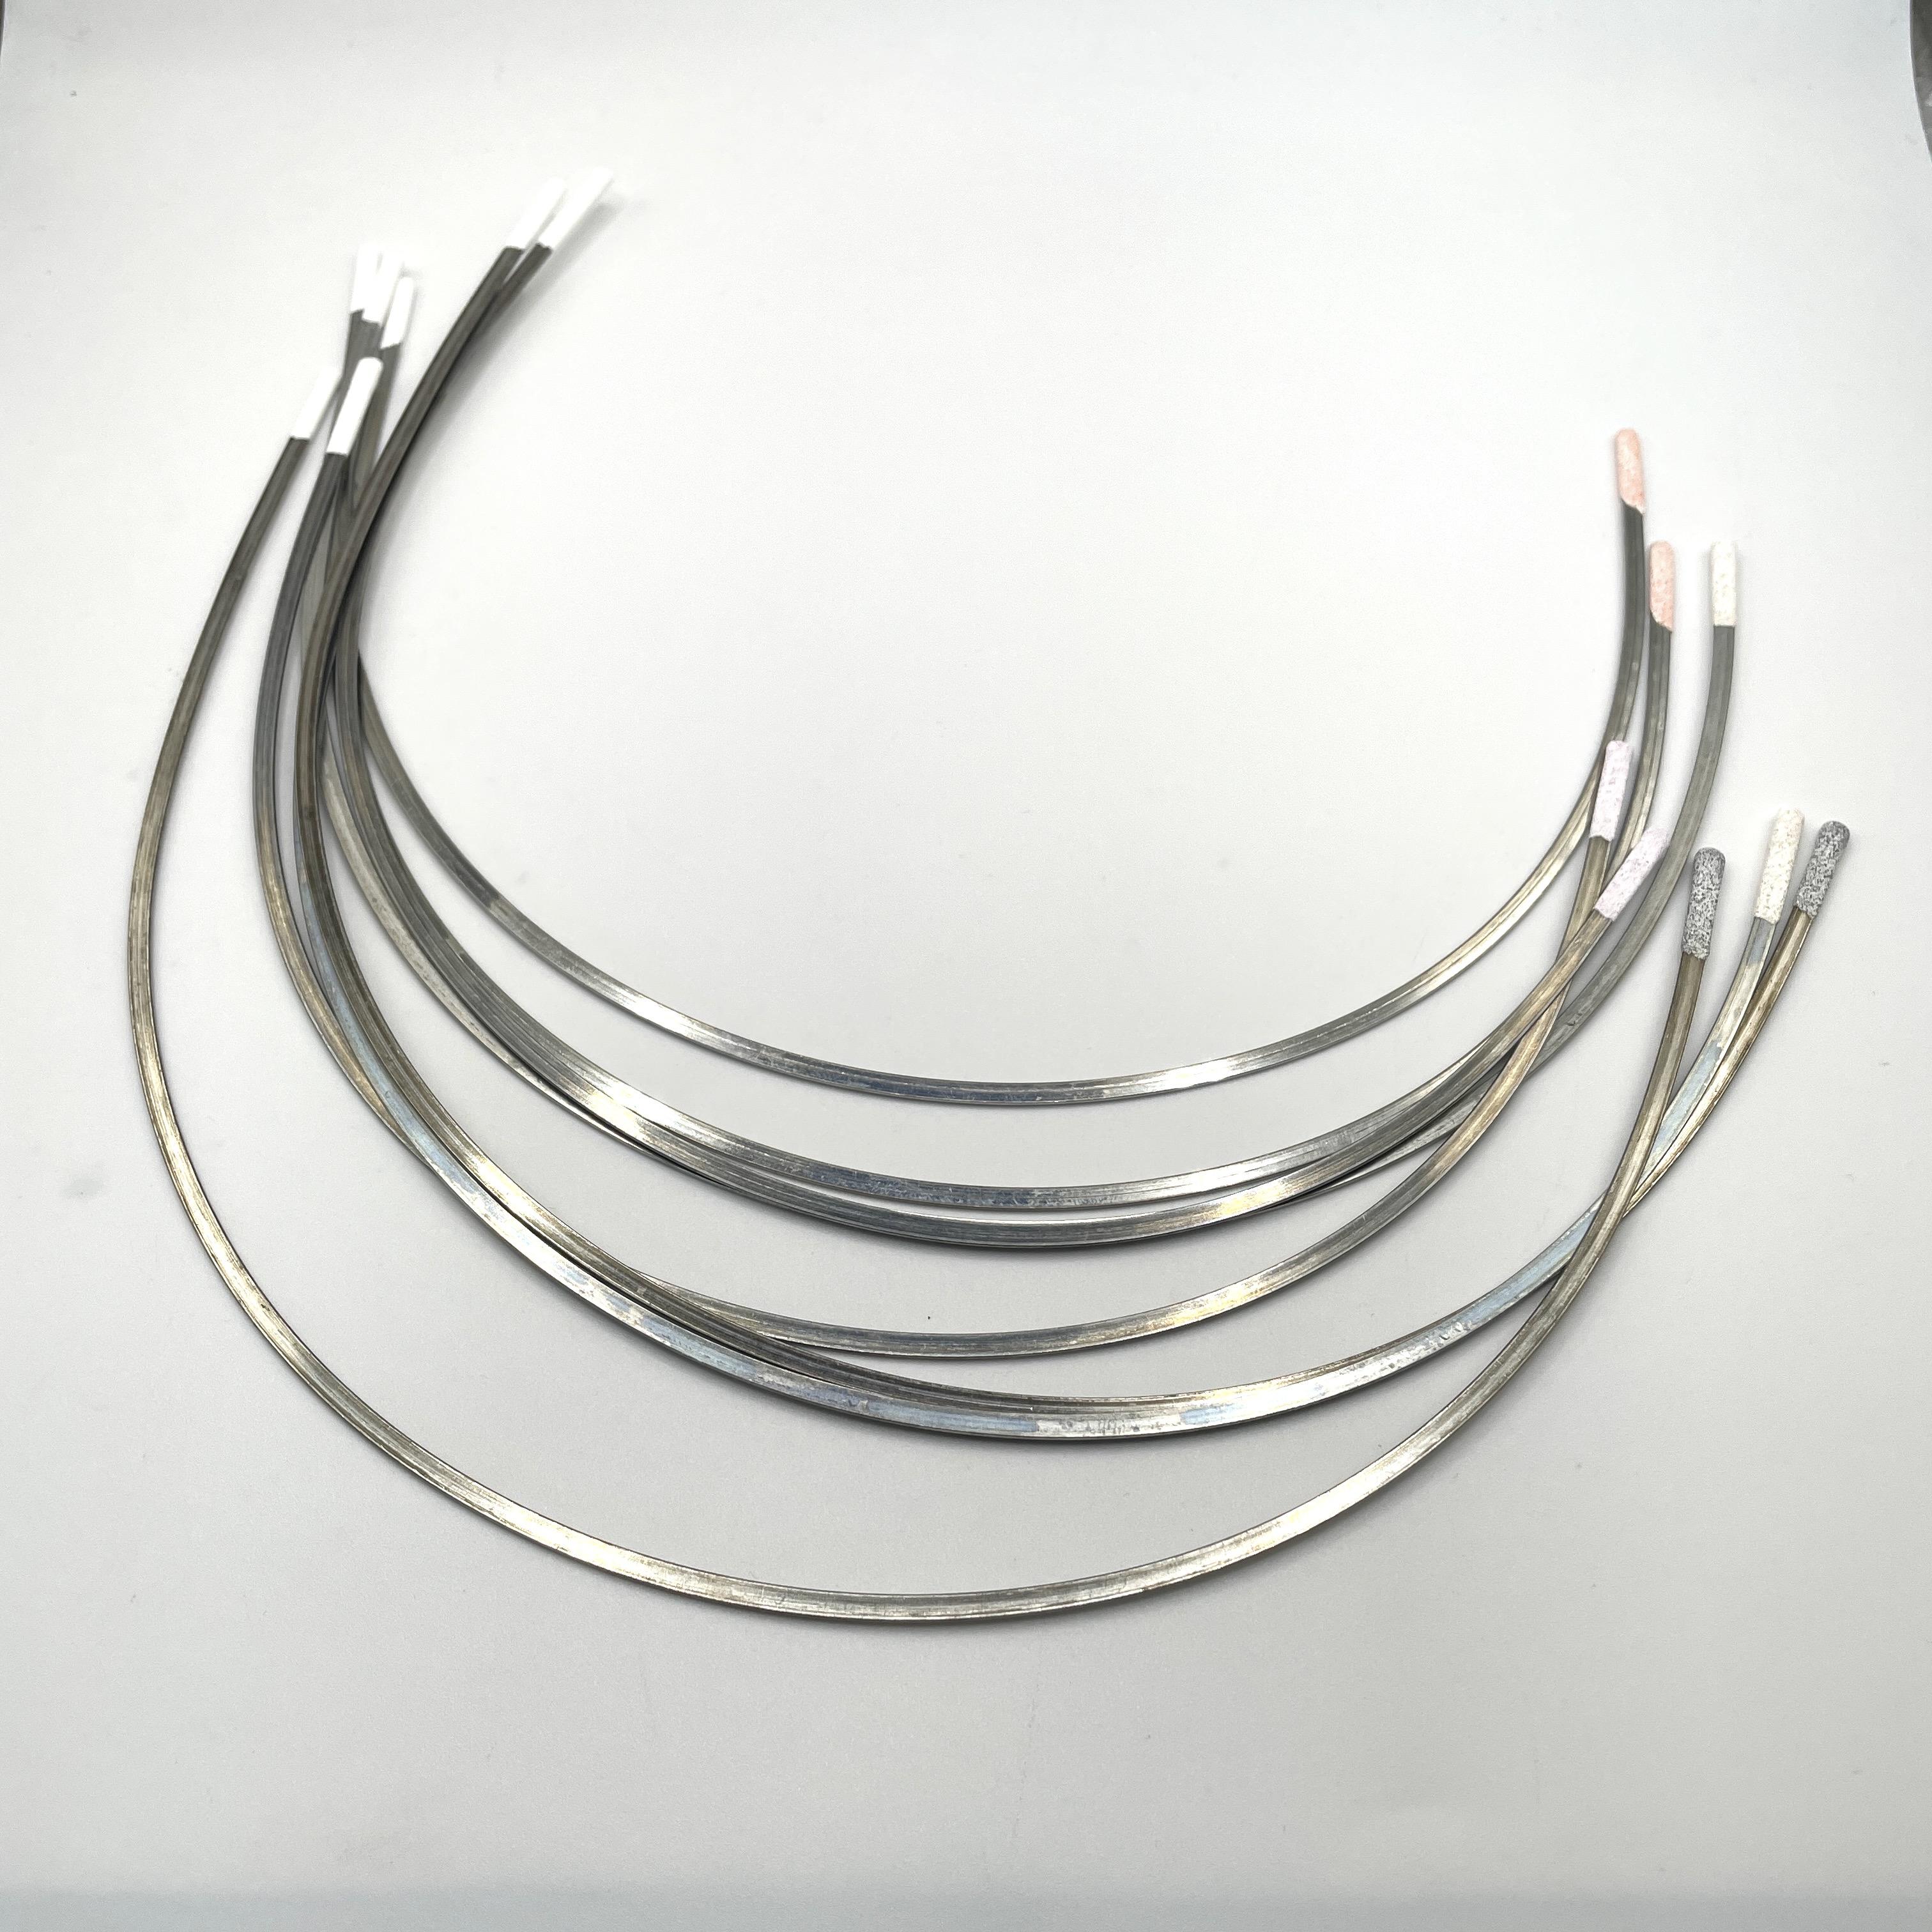 Bra Wires - Stainless steel with coated tips - style 992 (Wide) - Student  Pack, (2-4 pairs of wires) per pack